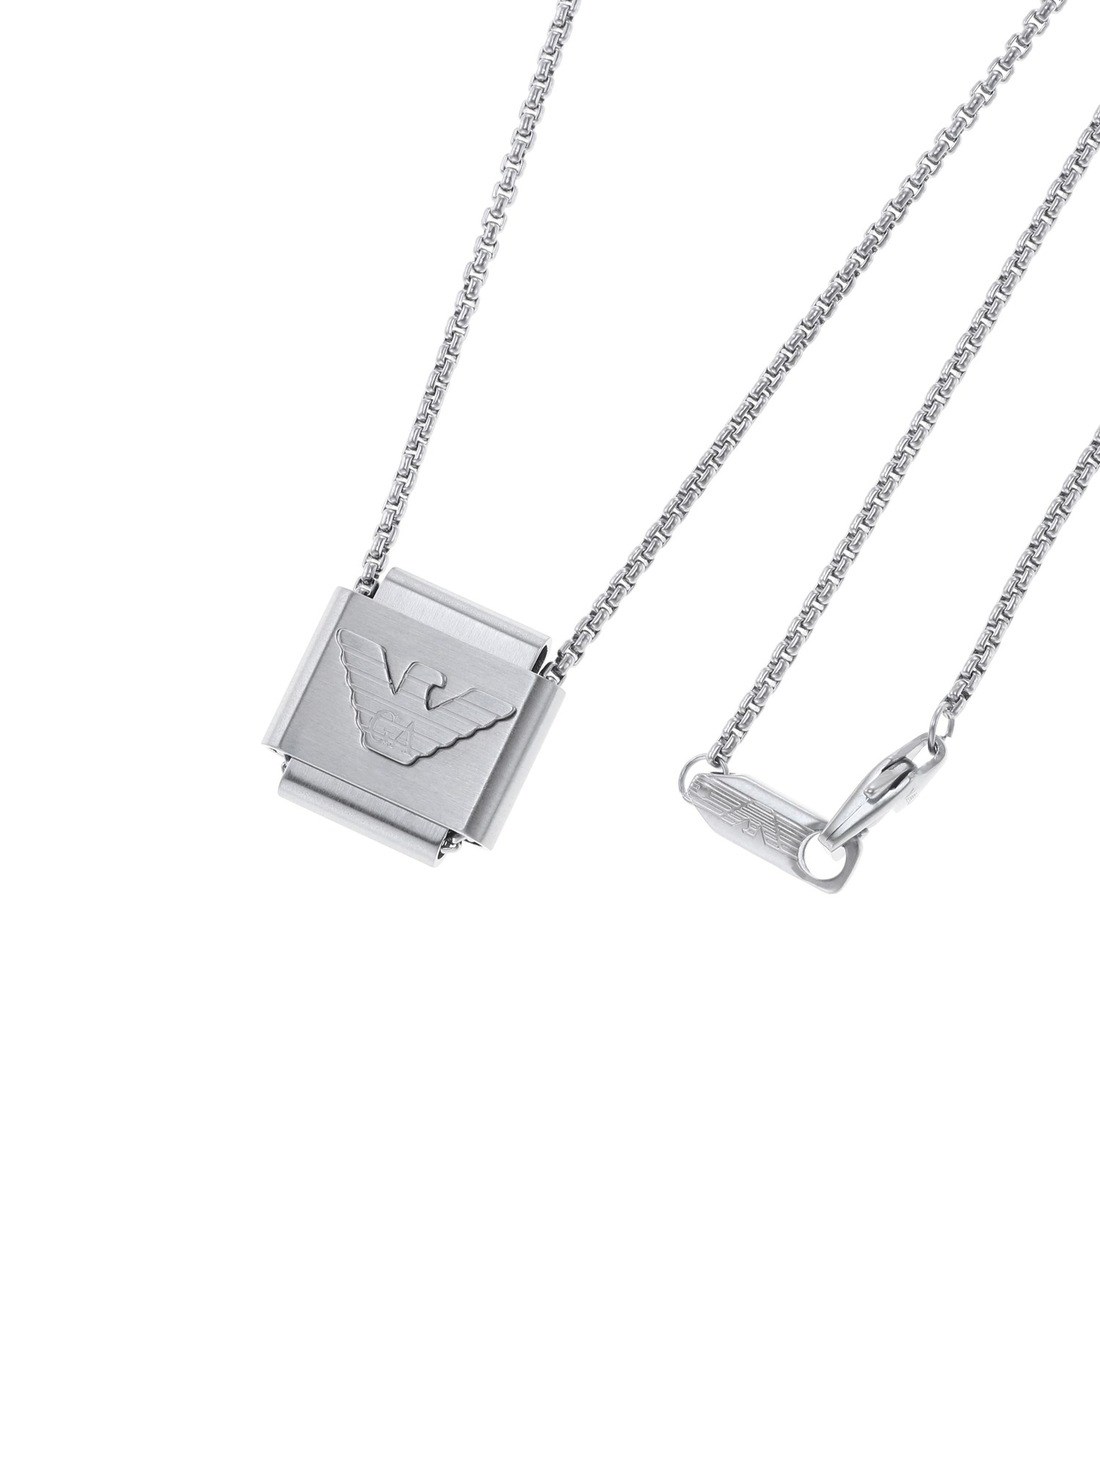 Emporio Armani Silver Necklace EGS2915040 - Watch Station India